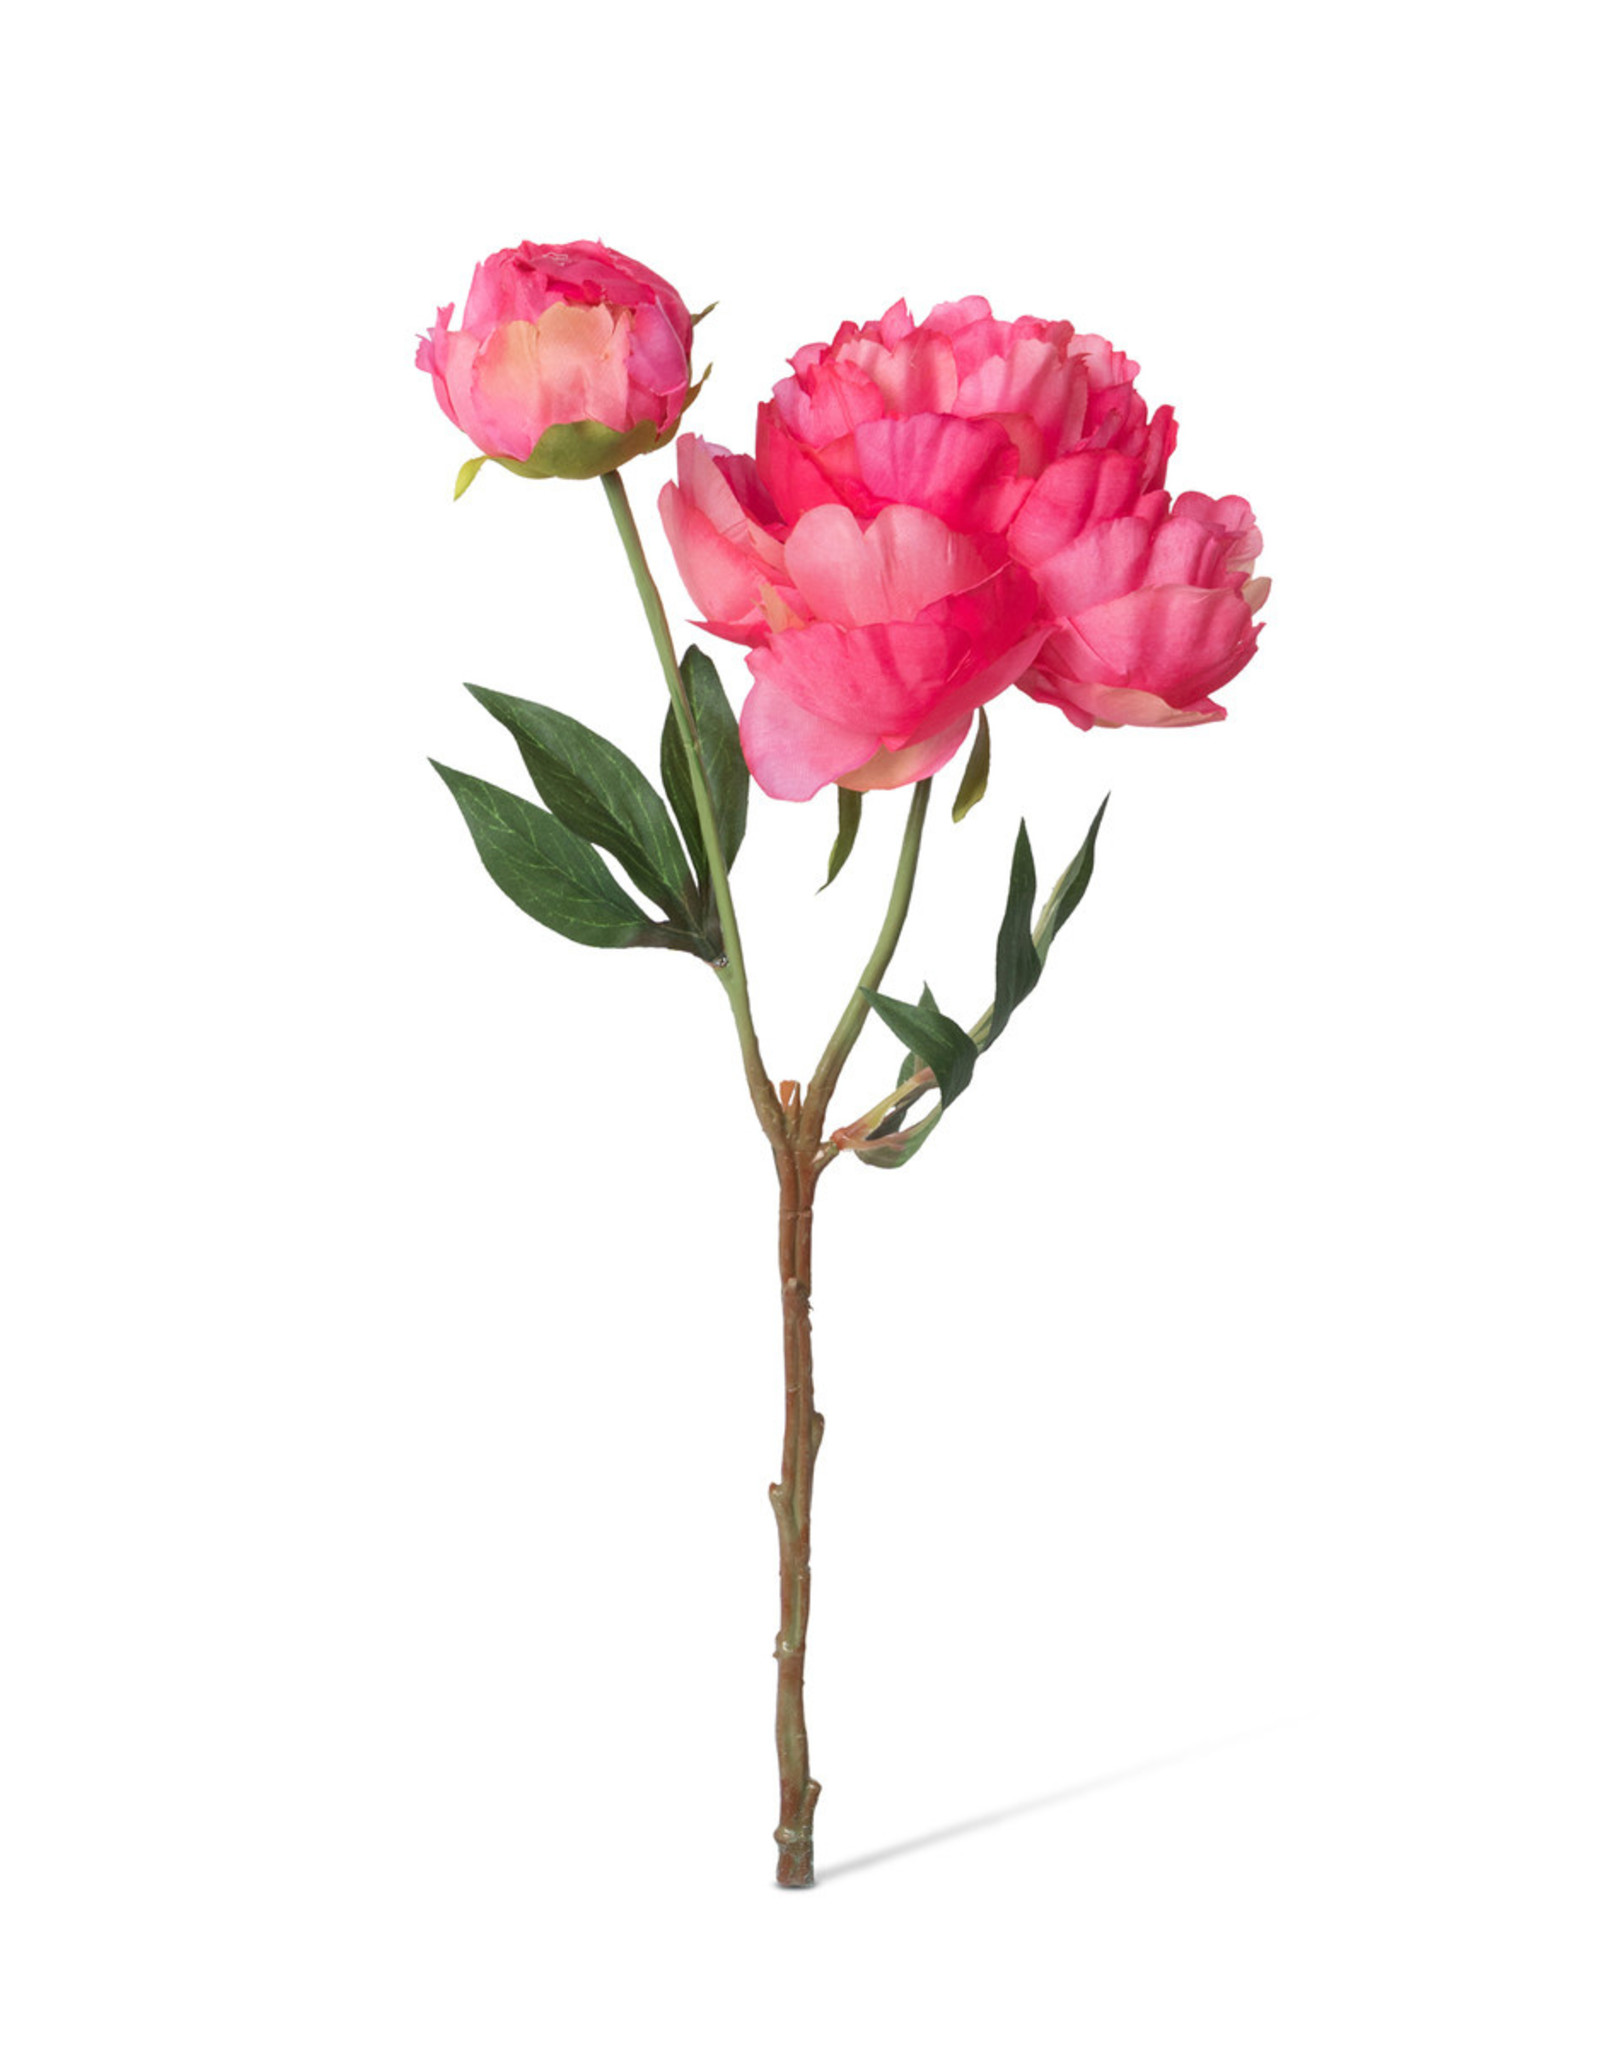 Park Hill Collection Summer Peony, Pink Cerise Mix, 3 Assorted Colors